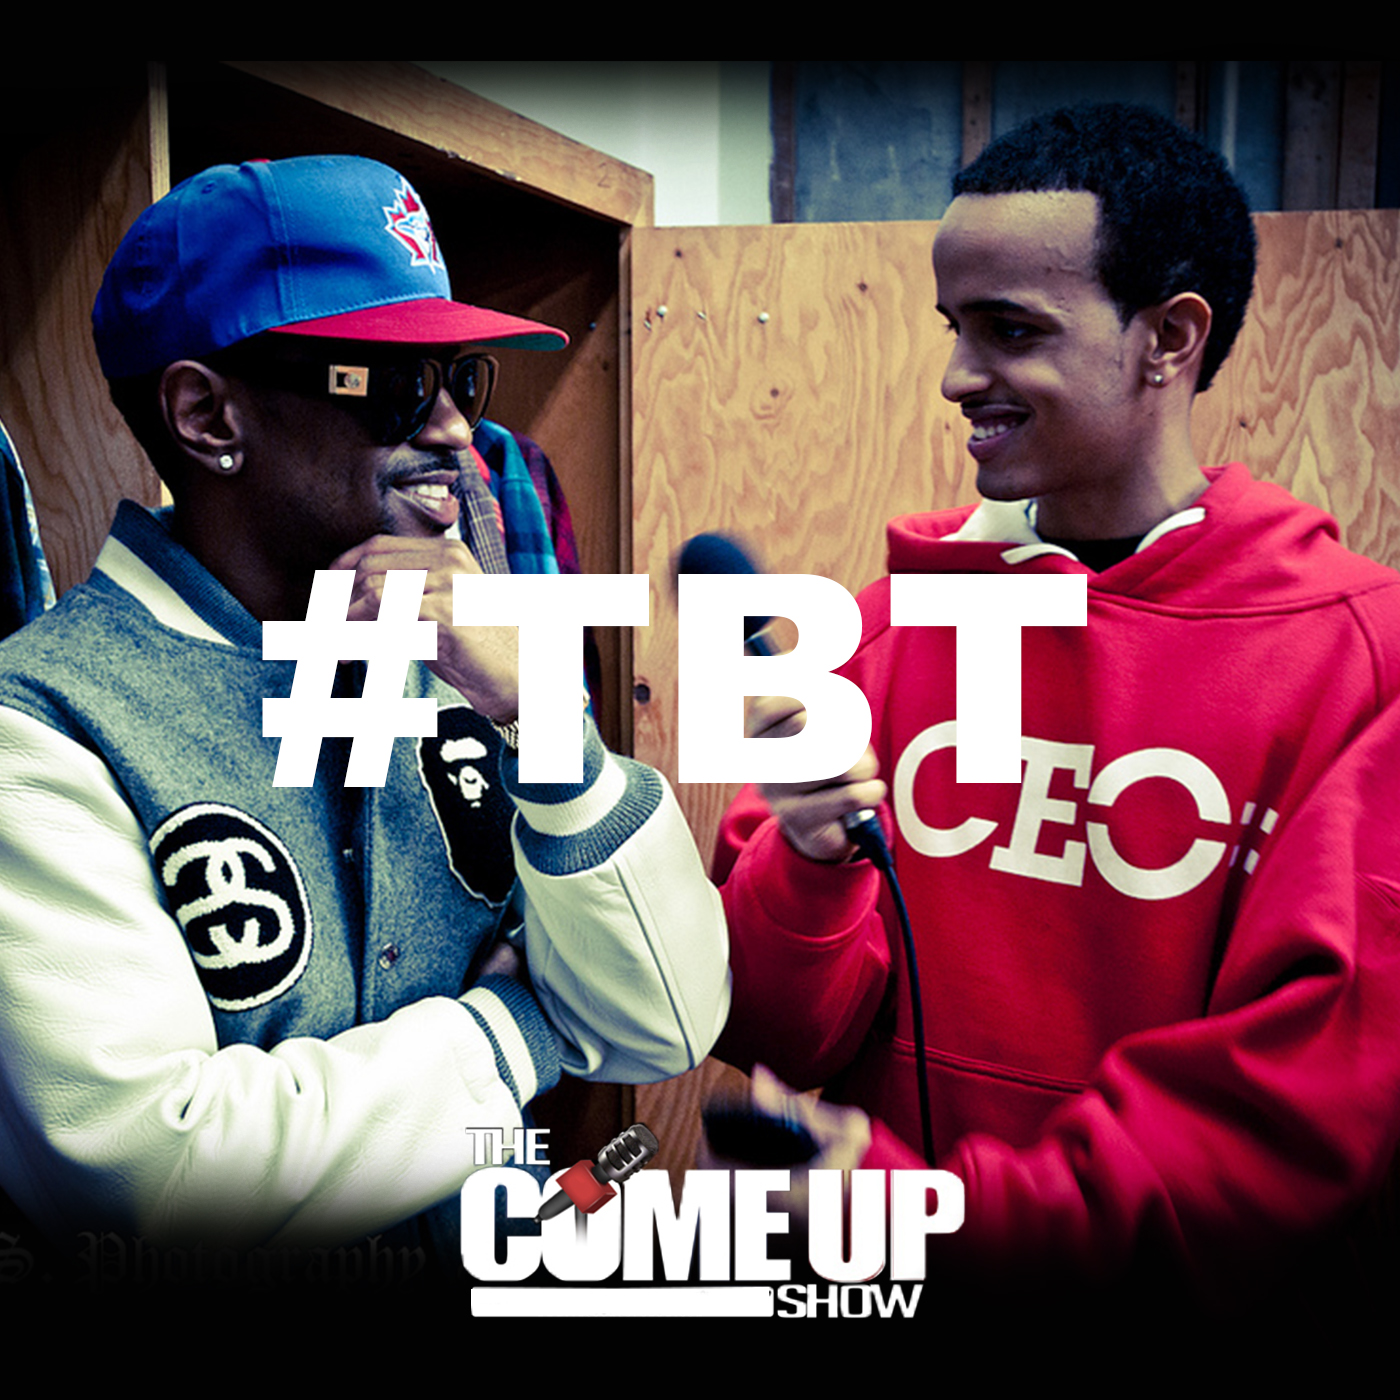 Thumbnail for "Big Sean - #ThrowBackThursday Podcast".